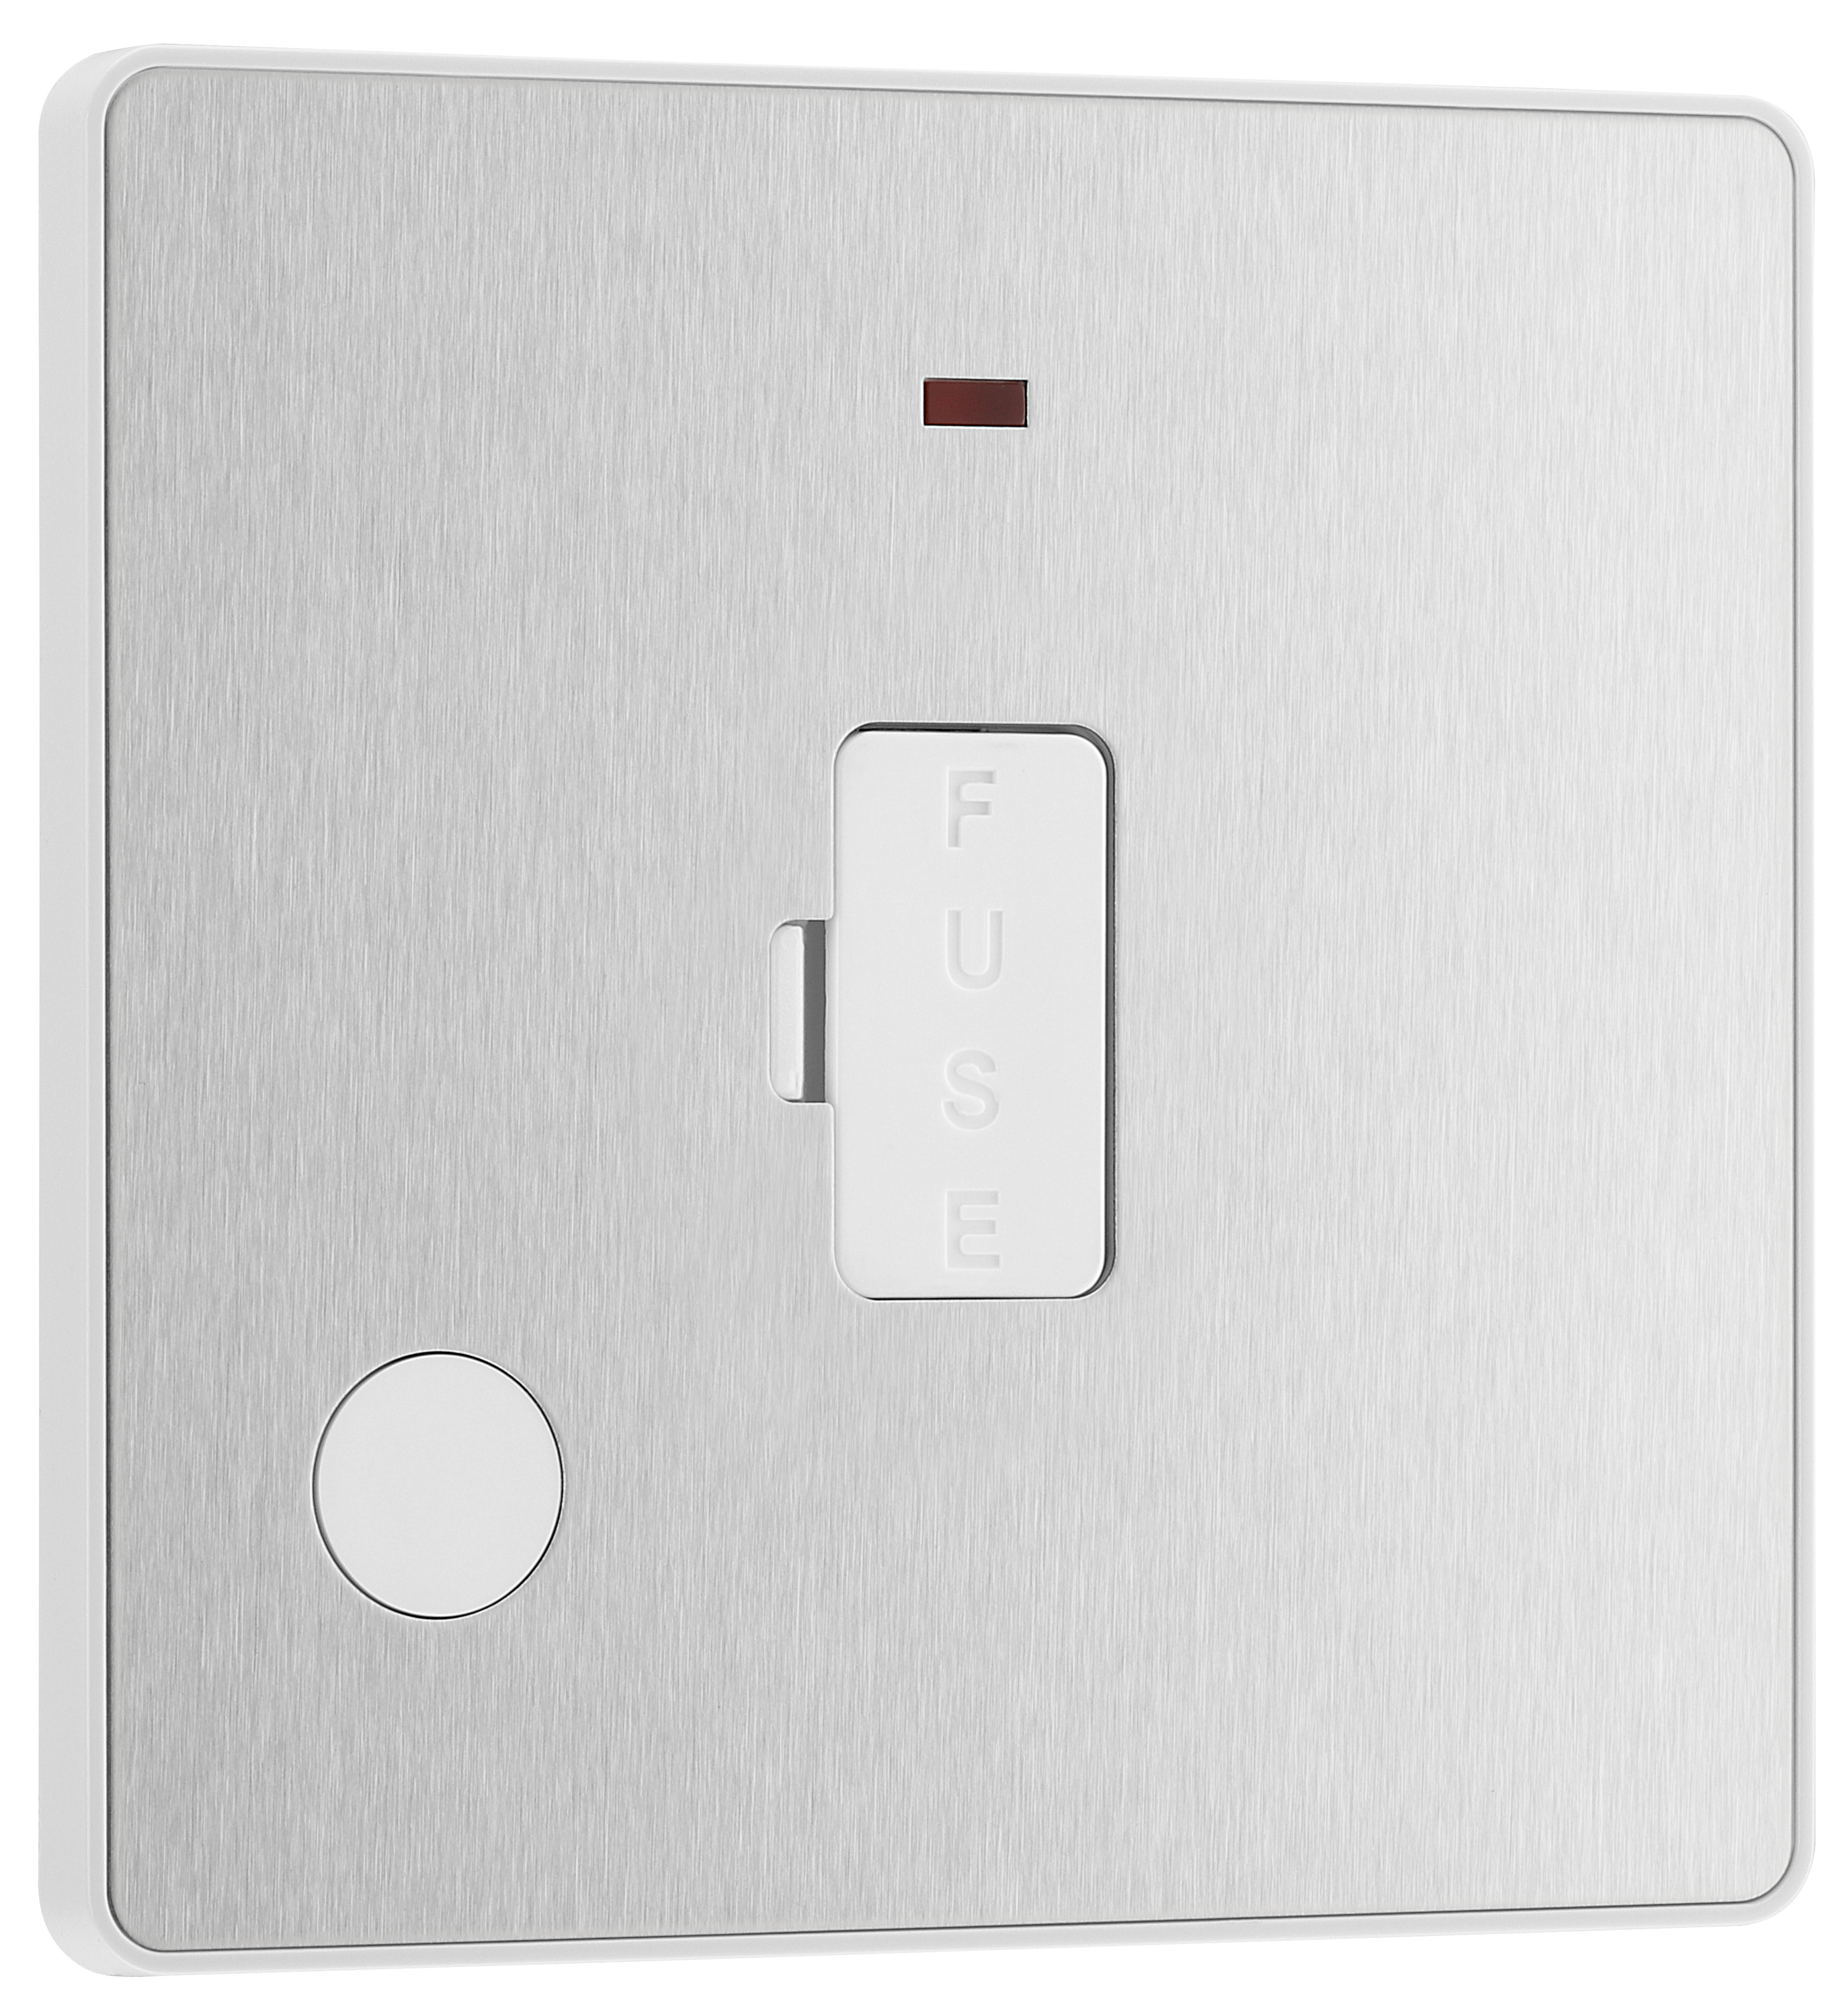 Image of BG Evolve Brushed Steel 13A Unswitched Fused Connection Unit with Power Led Indicator & Flex Outlet